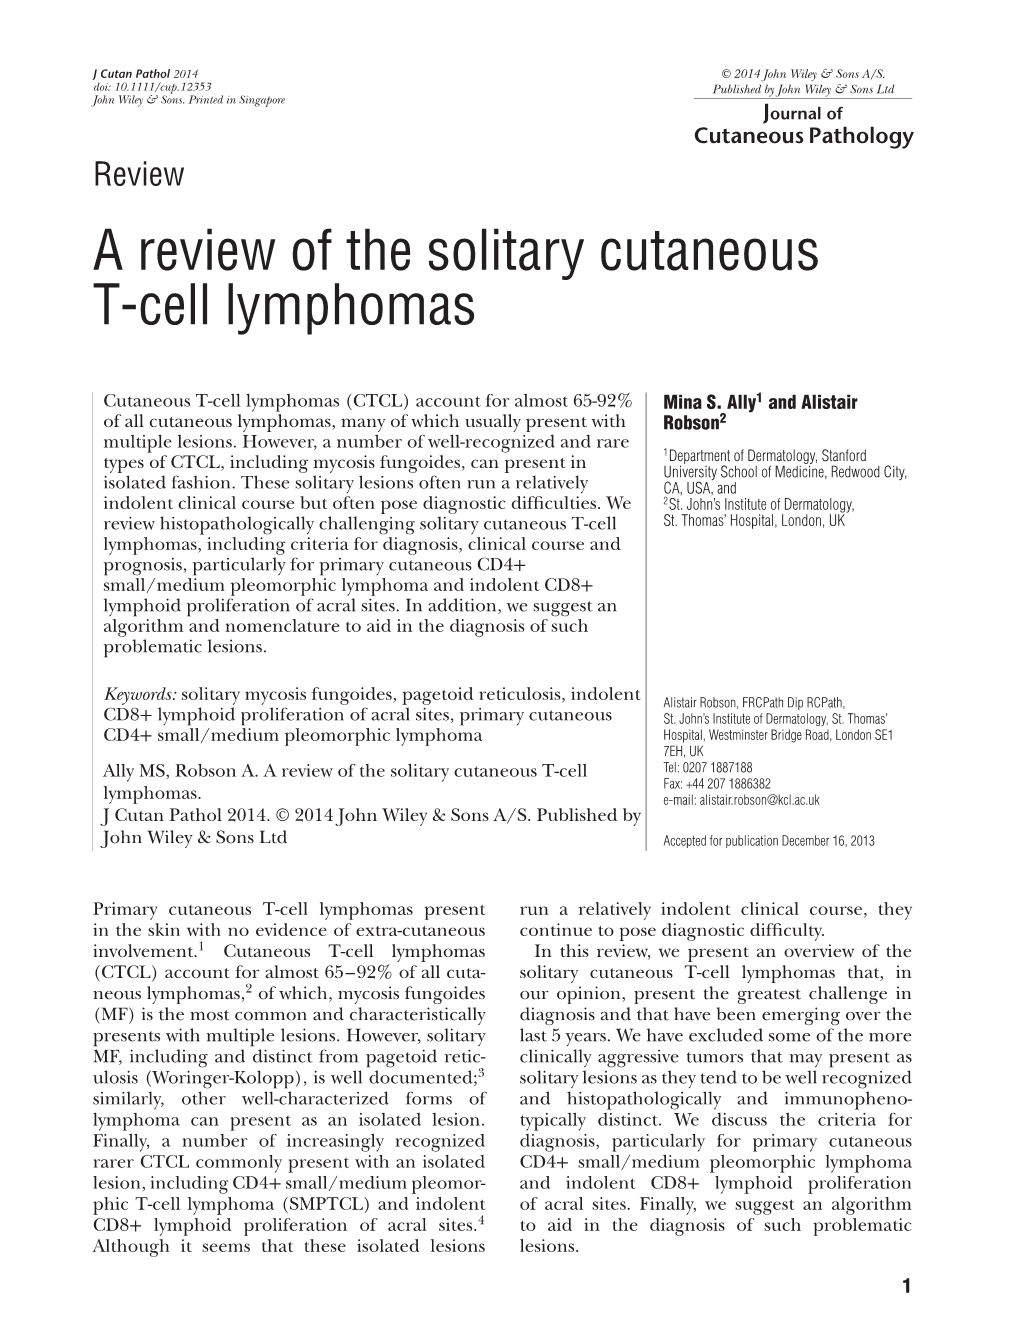 A Review of the Solitary Cutaneous T-Cell Lymphomas